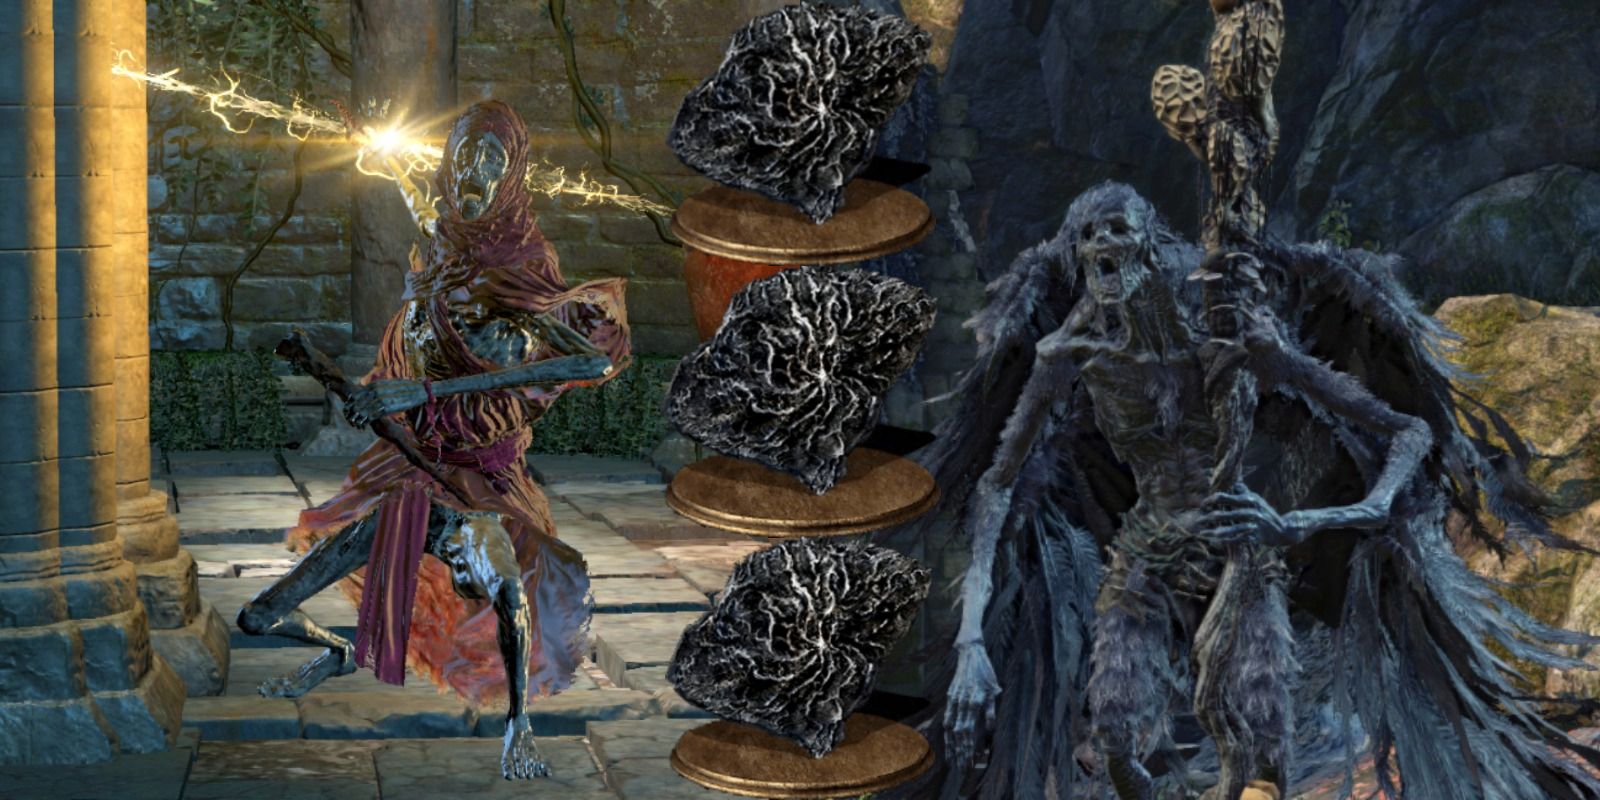 ringed city slave and corvian storyteller enemies with hollow gem icons in the middle.